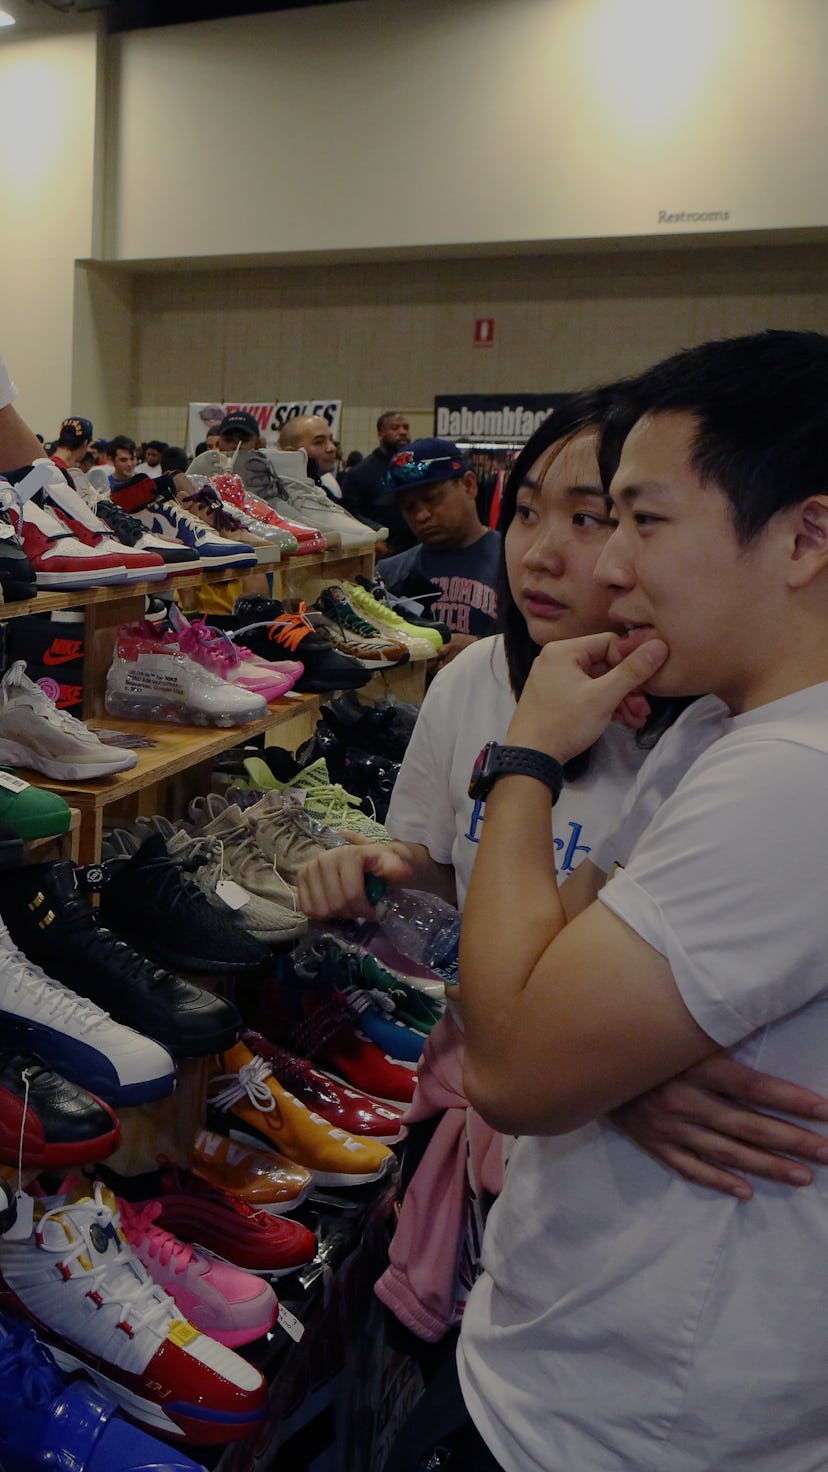 FT LAUDERDALE, FLORIDA - FEBRUARY 02: Shoppers inspect sneakers on sale by Texas Shoe Exchange durin...